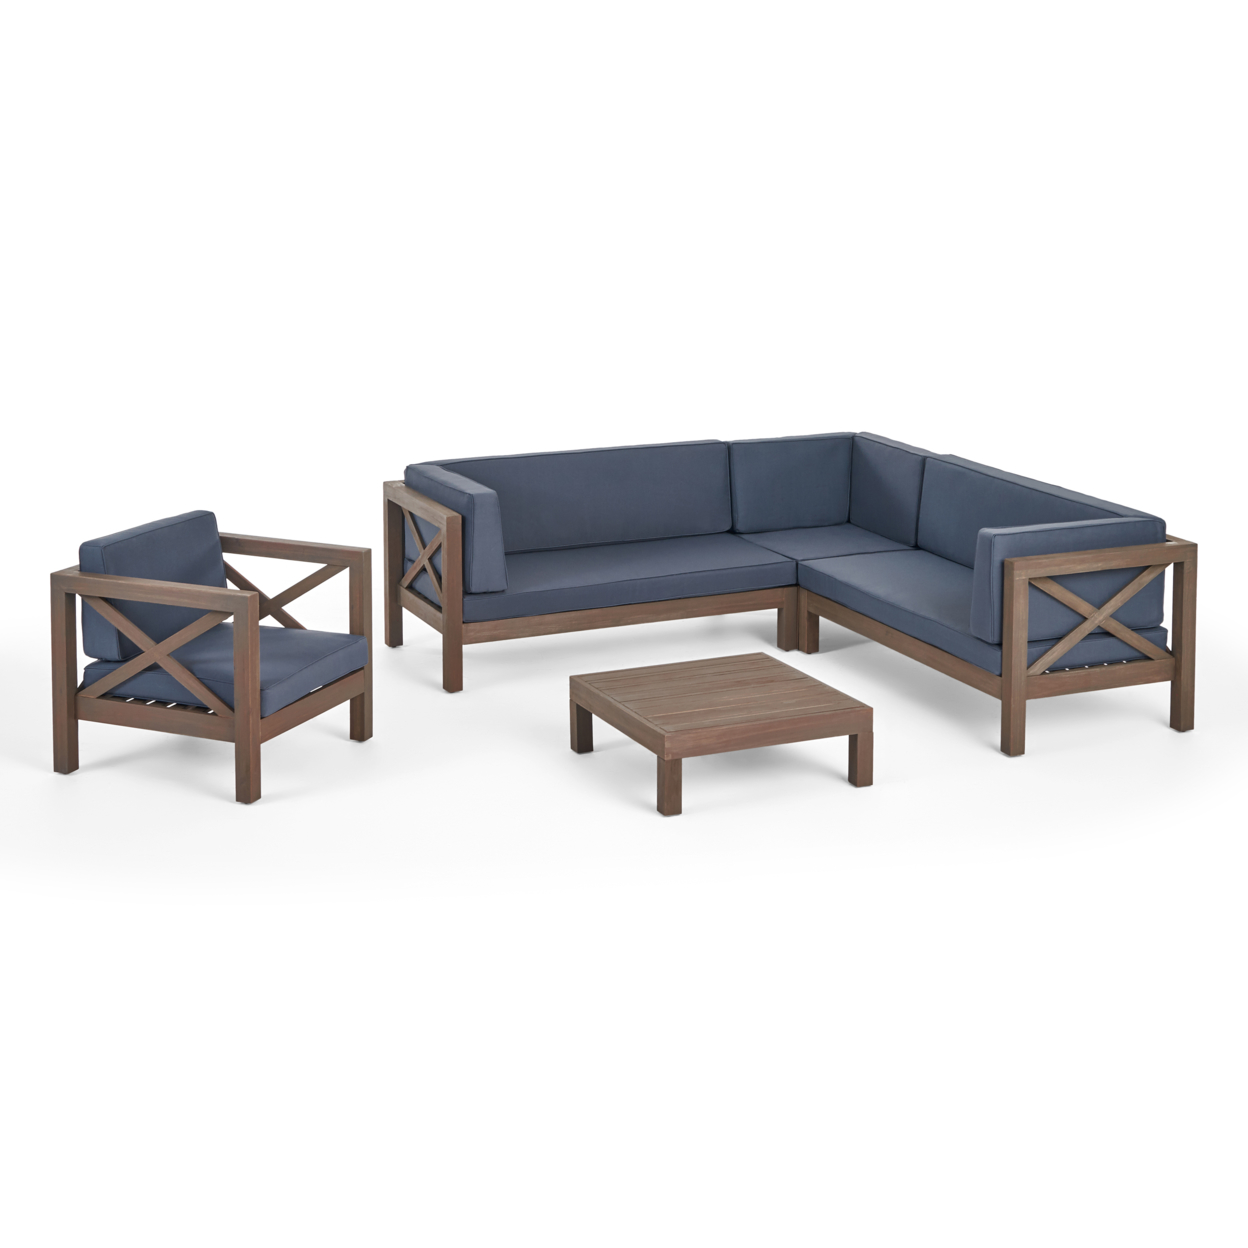 Morgan Outdoor 6 Seater Acacia Wood Sectional Sofa And Club Chair Set - Teak Finish + Beige